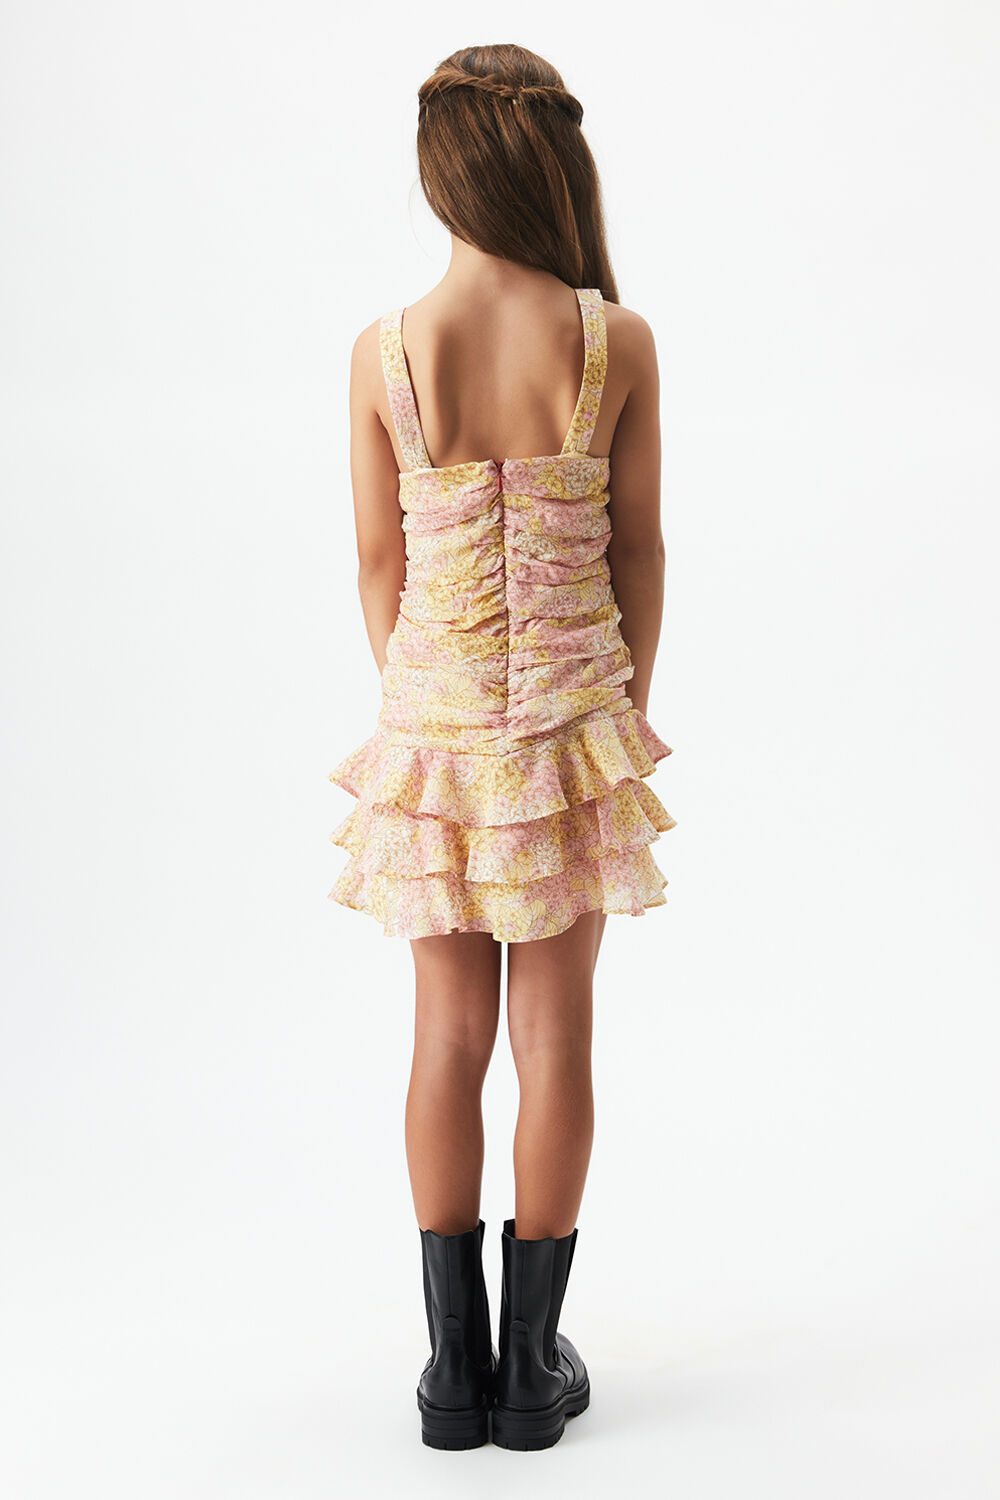 GIRLS MIKA FLORAL DRESS in colour EL N YELLOW